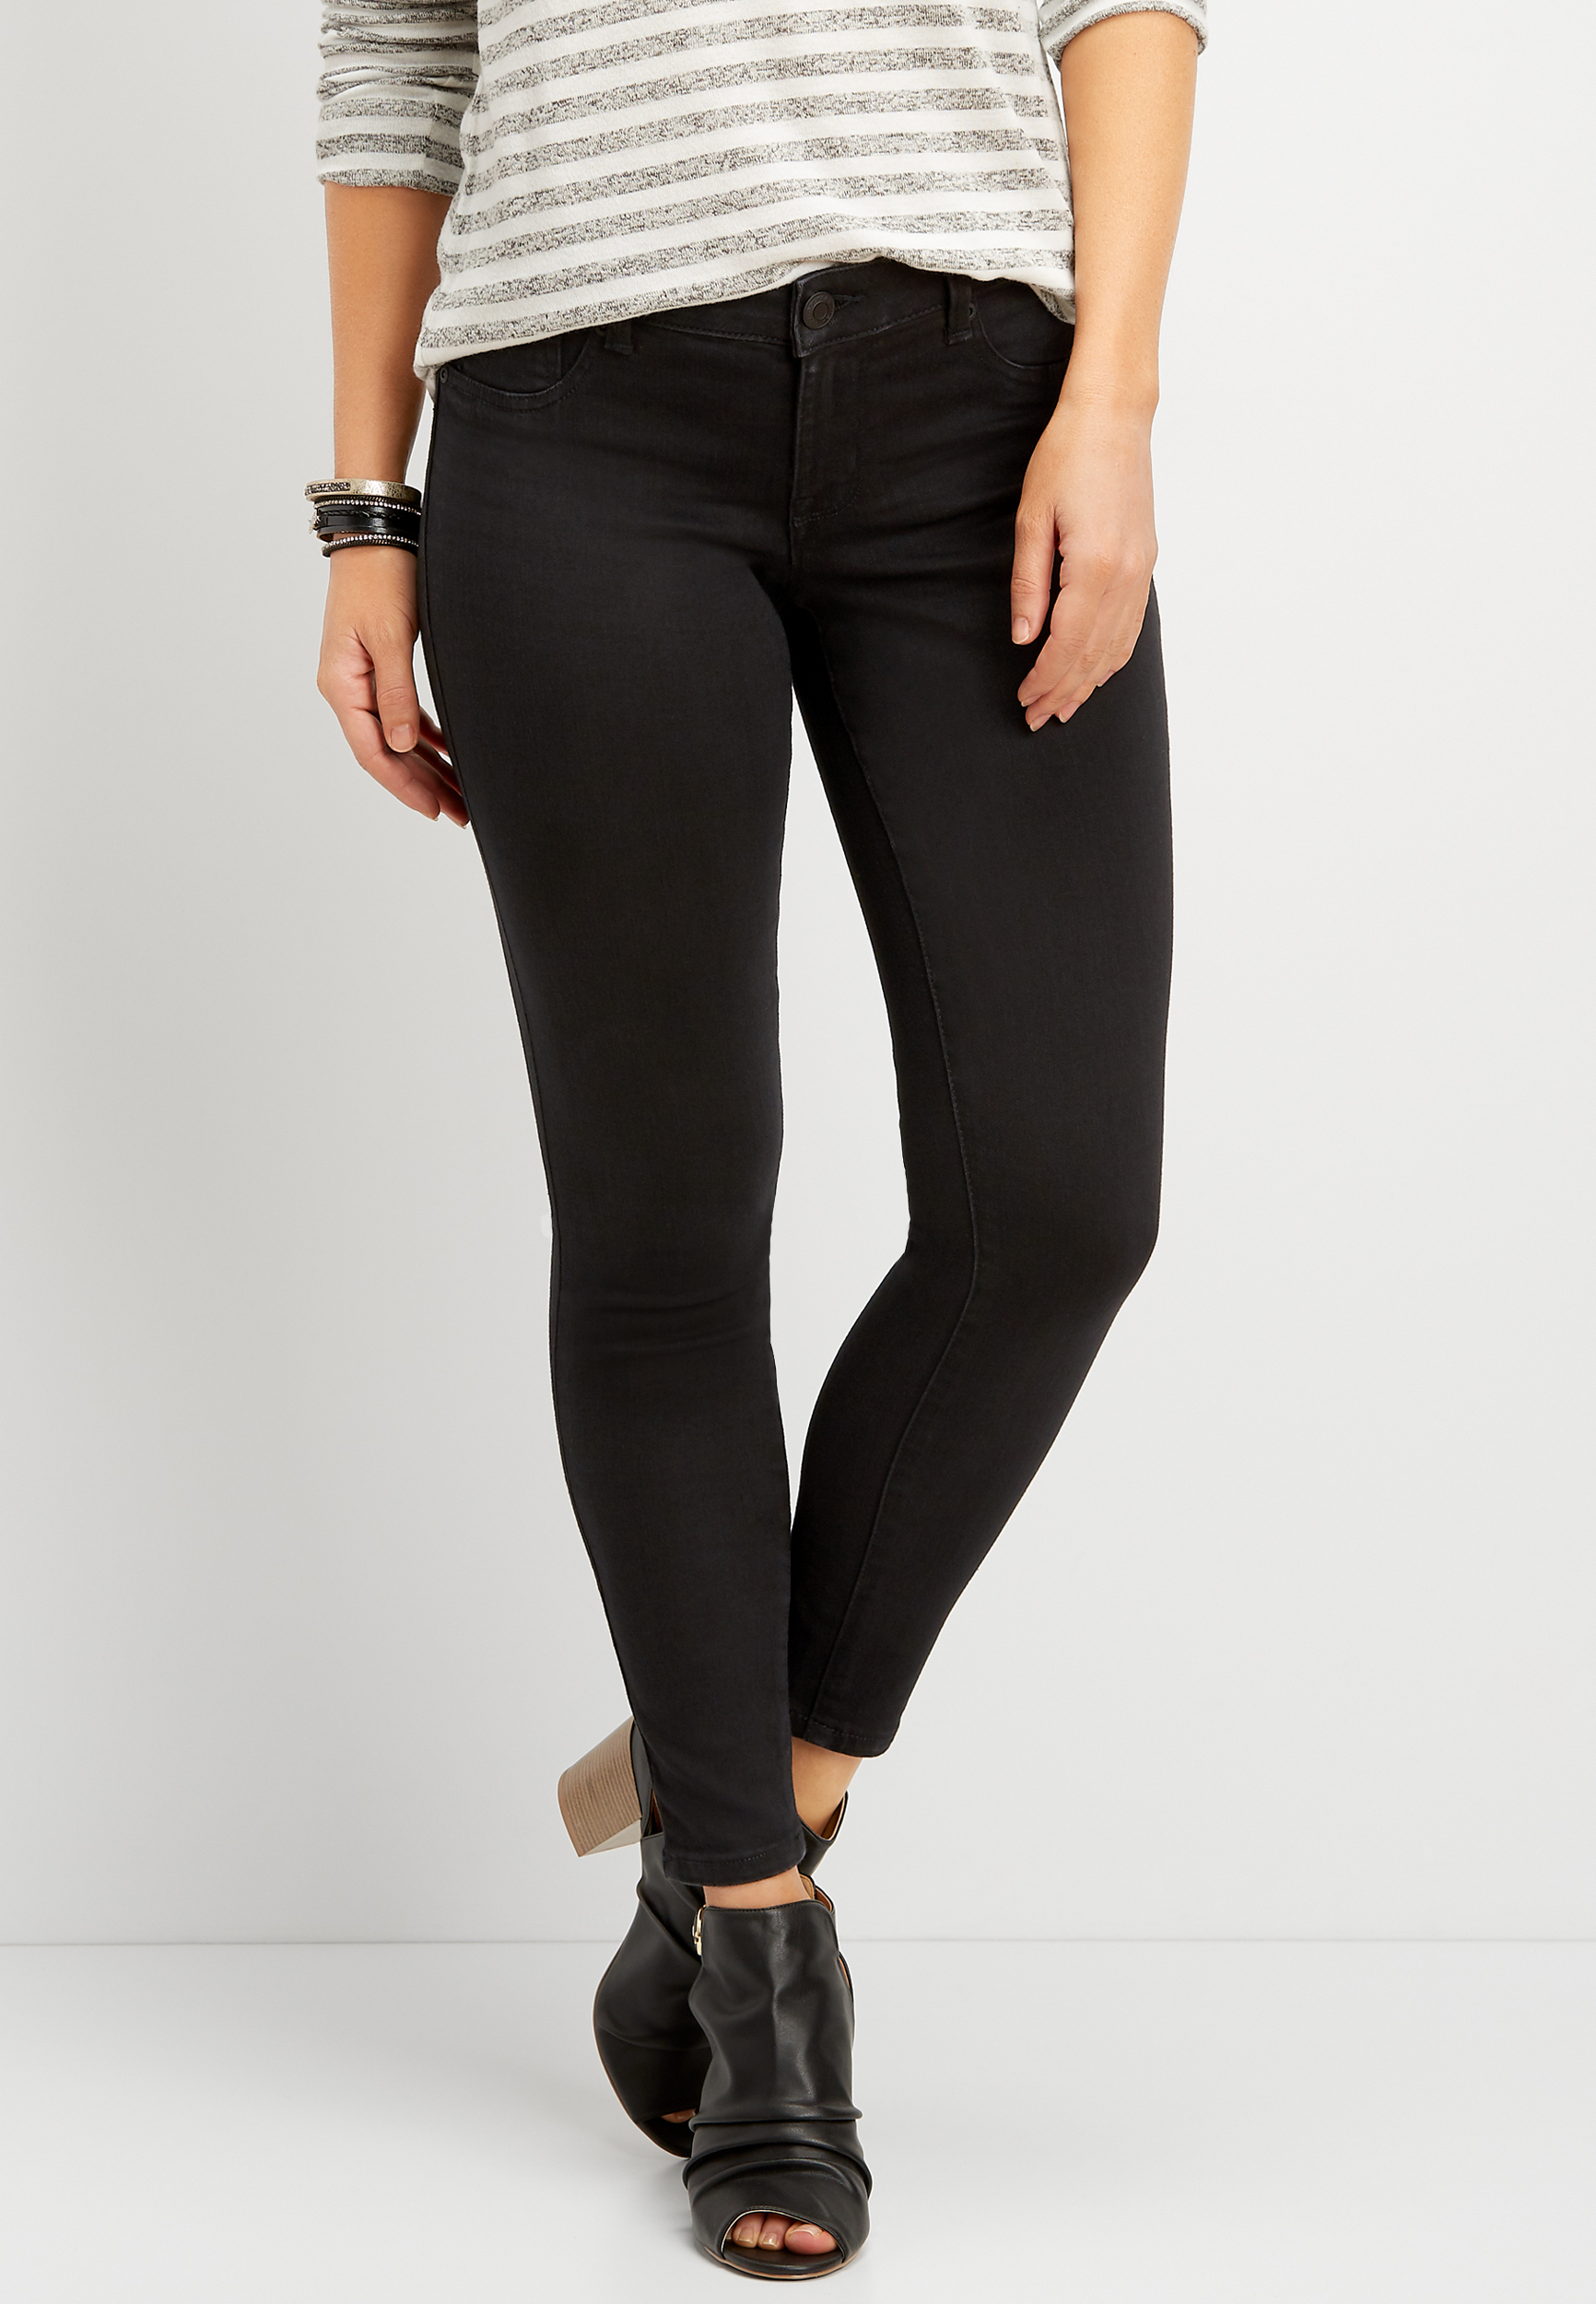 maniac Met opzet profiel m jeans by maurices™ Black Mid Rise Jegging | maurices